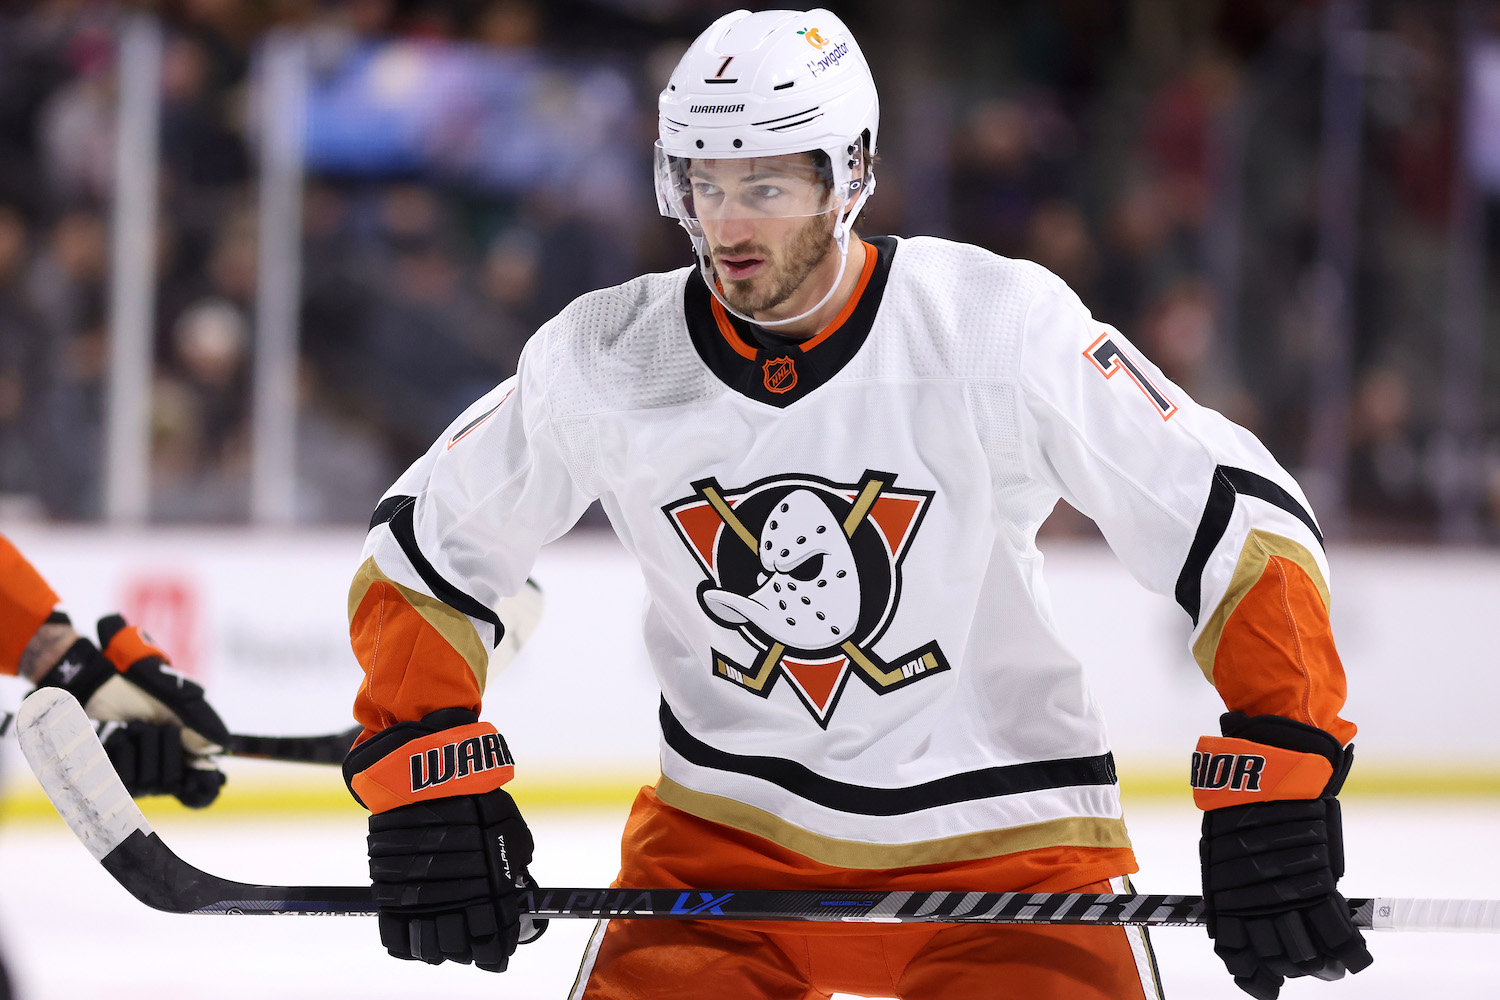 TEMPE, ARIZONA - JANUARY 24: Jayson Megna #7 of the Anaheim Ducks during the first period of the NHL game at Mullett Arena on January 24, 2023 in Tempe, Arizona. (Photo by Christian Petersen/Getty Images)